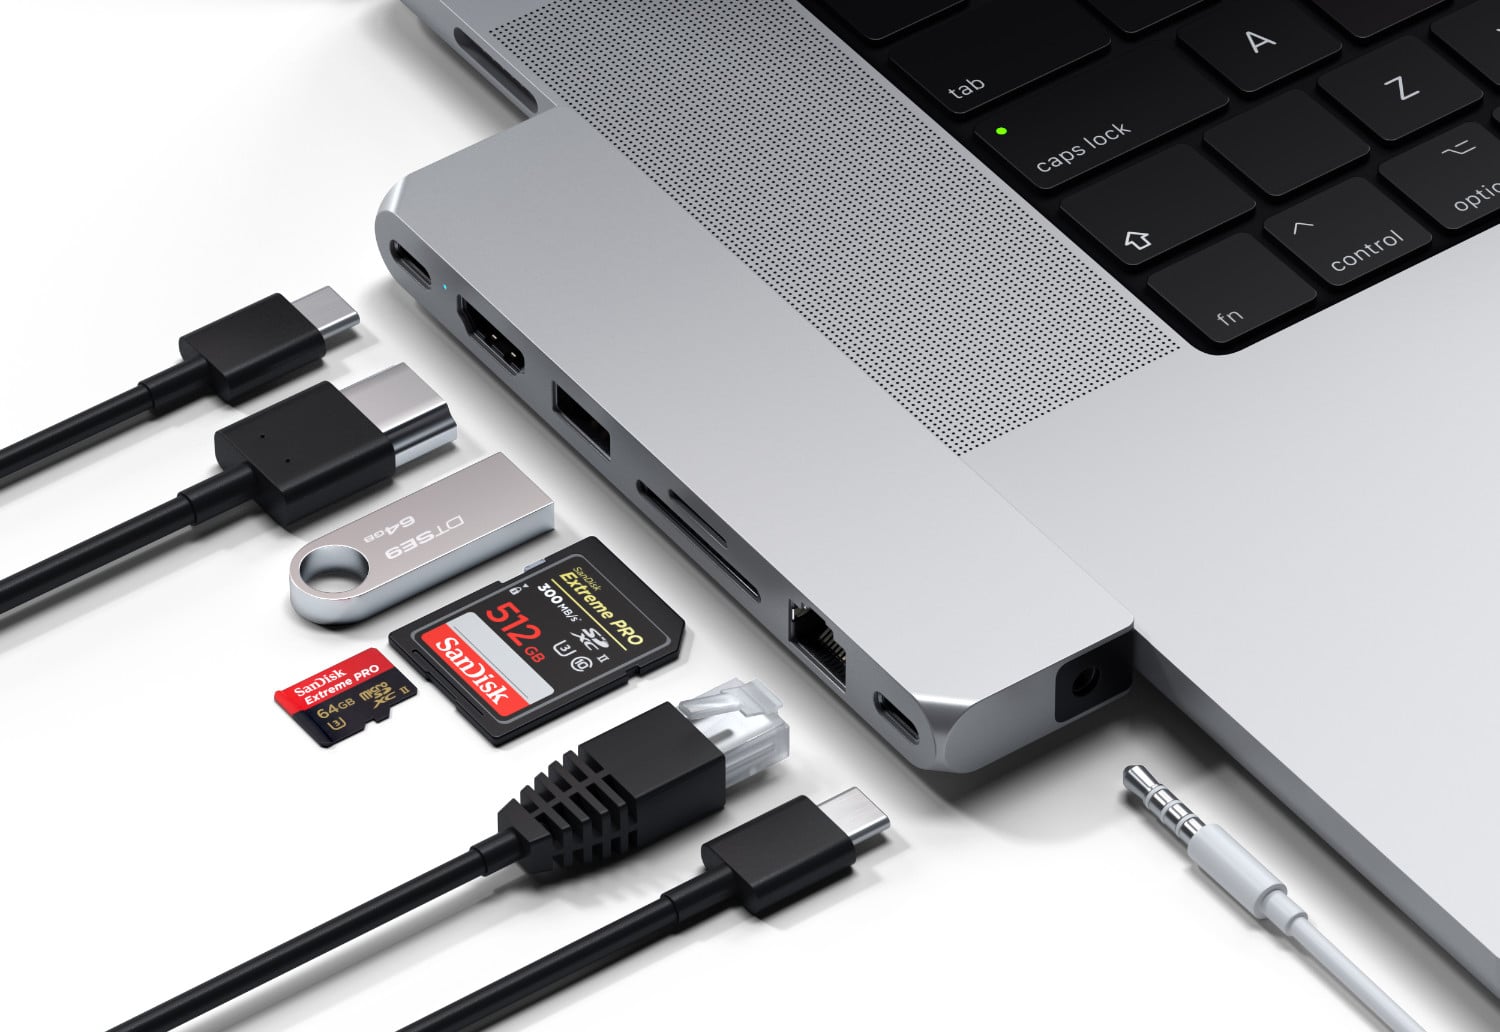 Apple | Satechi: Two new hubs released for the 2021 M1 MacBook Pro | macbook | Satechi Pro Hub